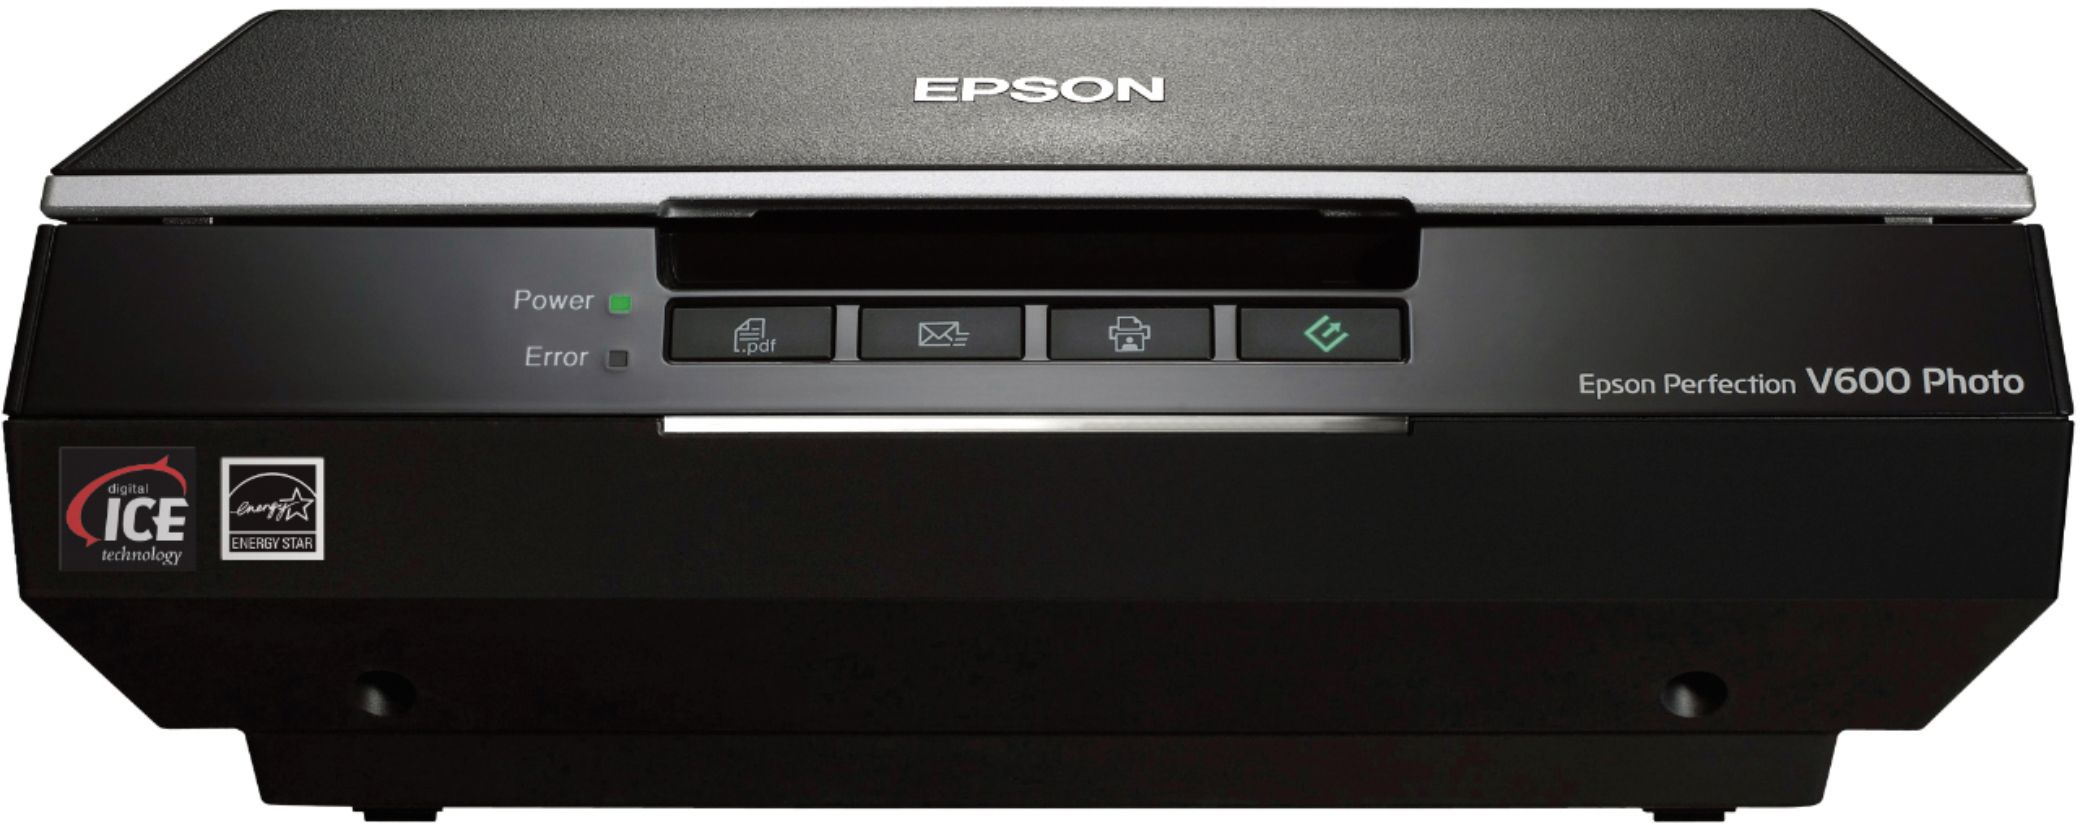 Epson Perfection V600 Photo Scanner, Products